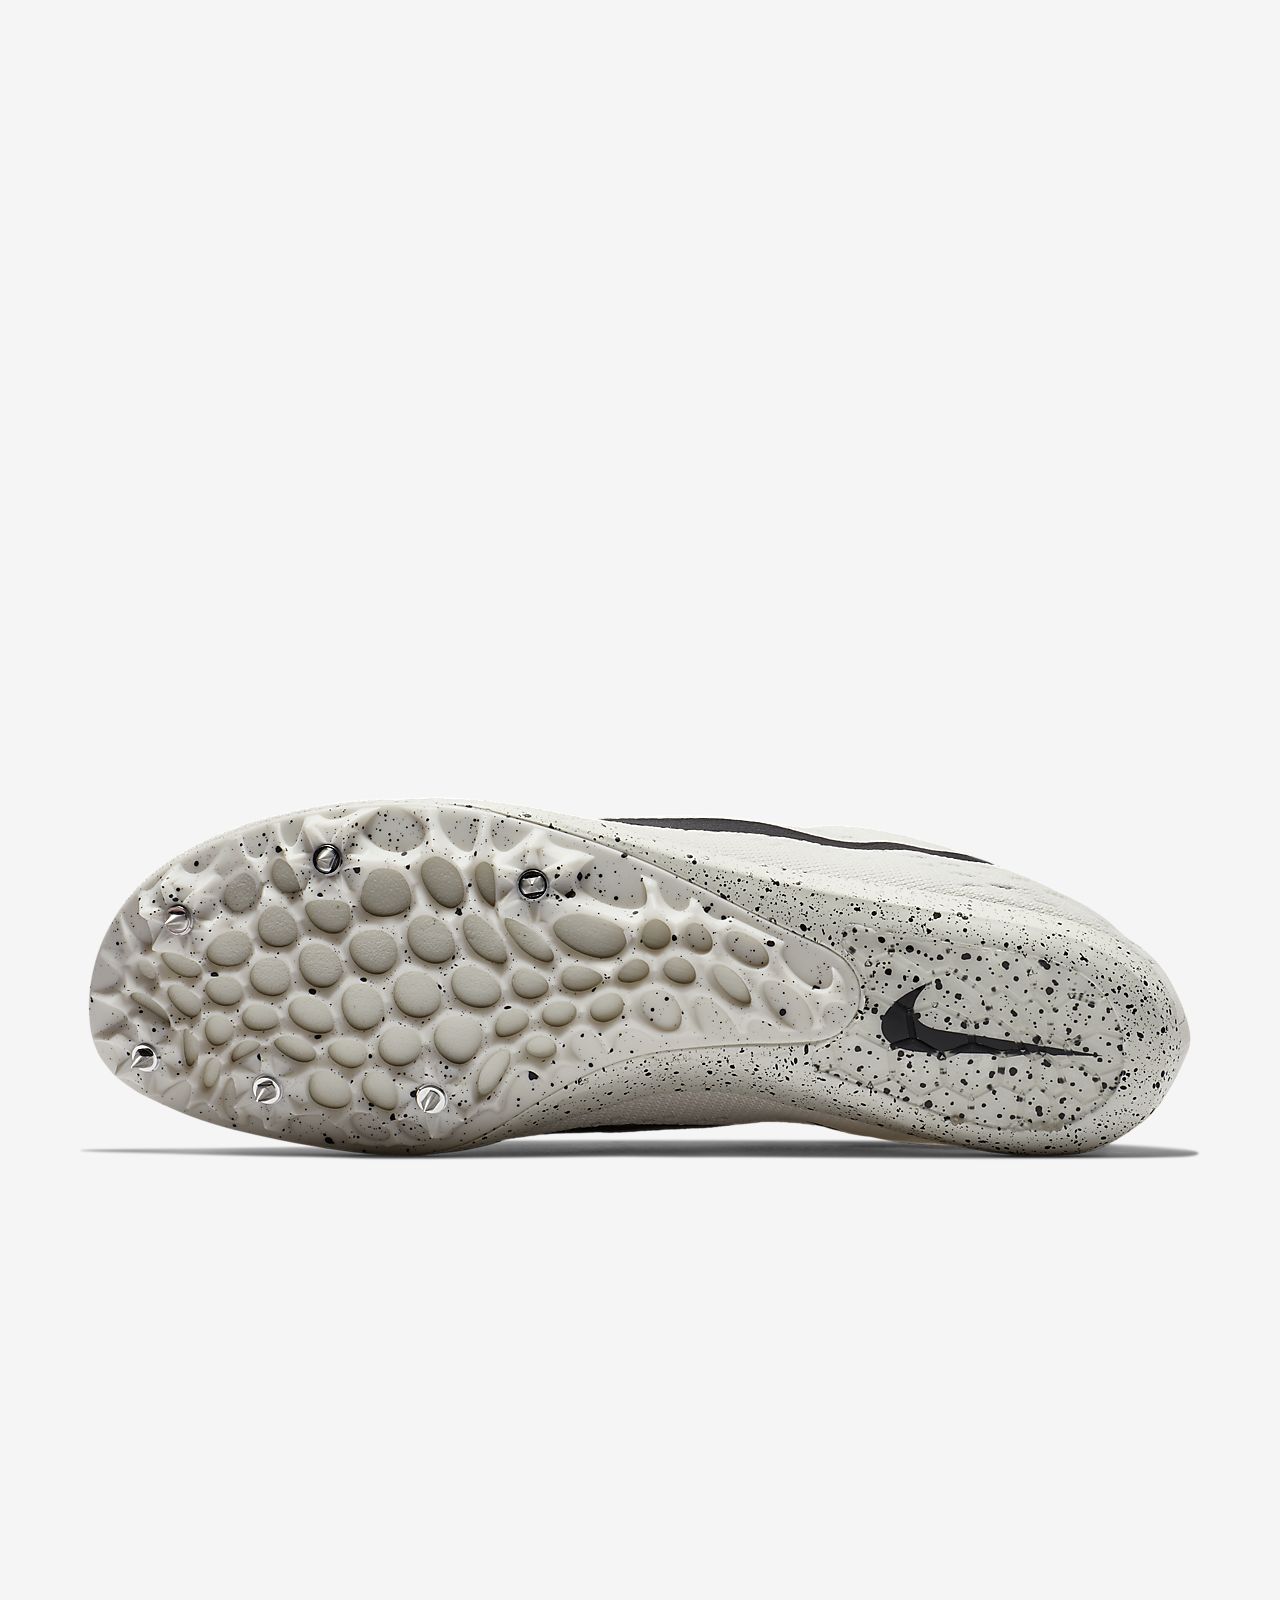 nike zoom air insoles